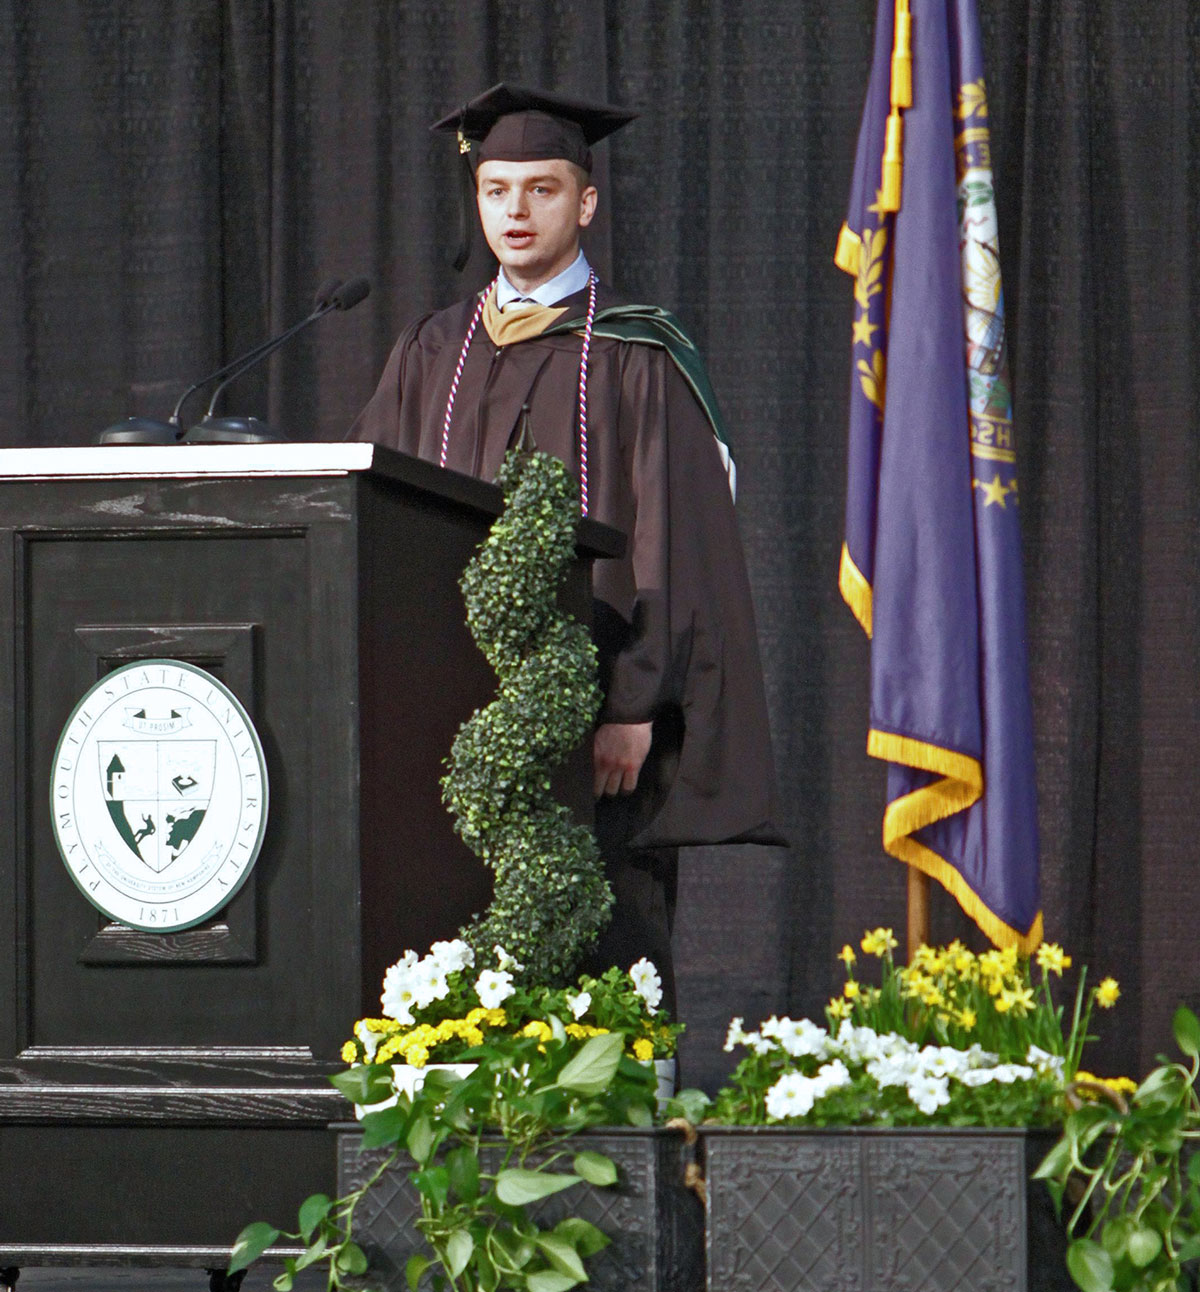 Speaker at the 2022 Commencement